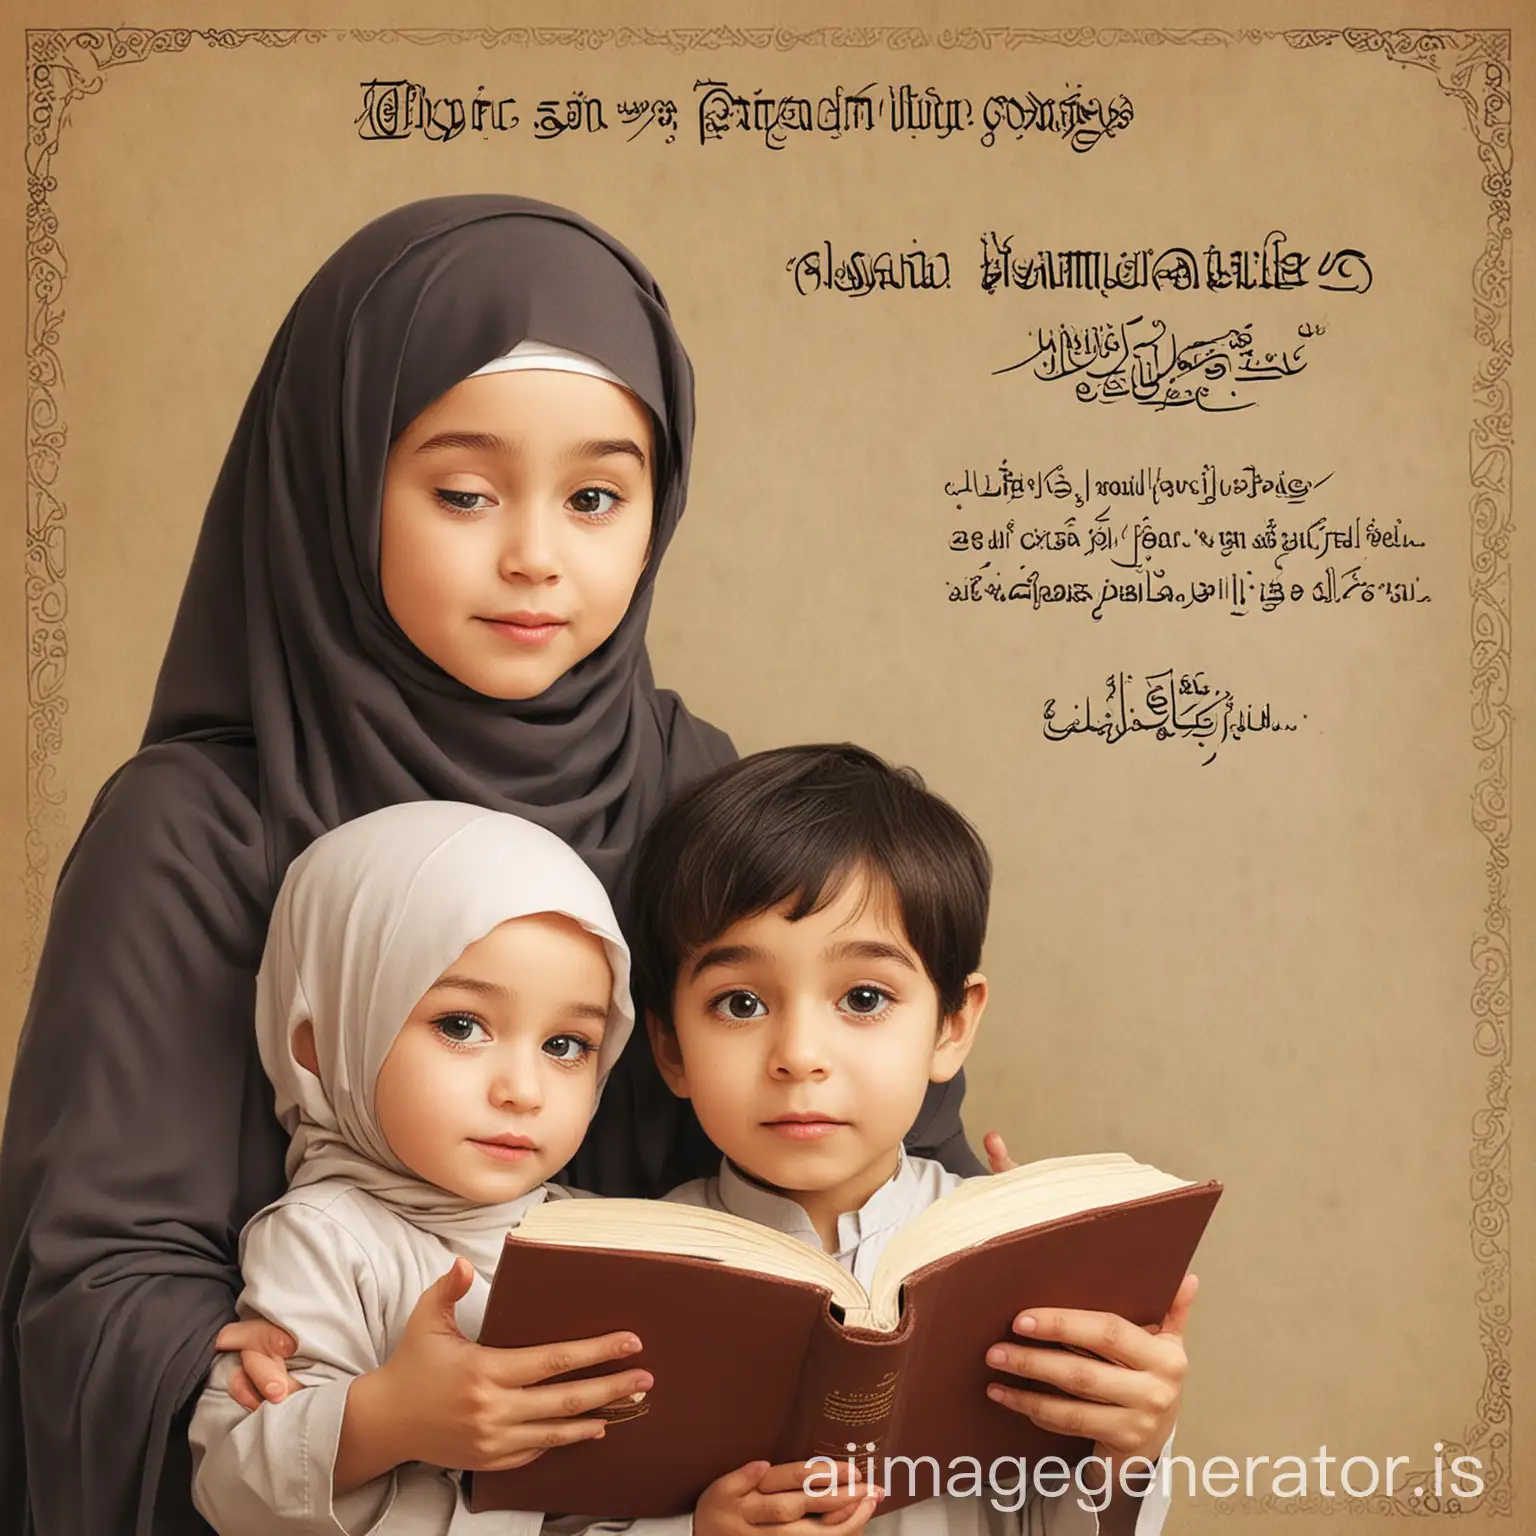 title 3P : Islamic Parenting with Patience and Prayernfor a cover page of a book. 2 boy 1 girl